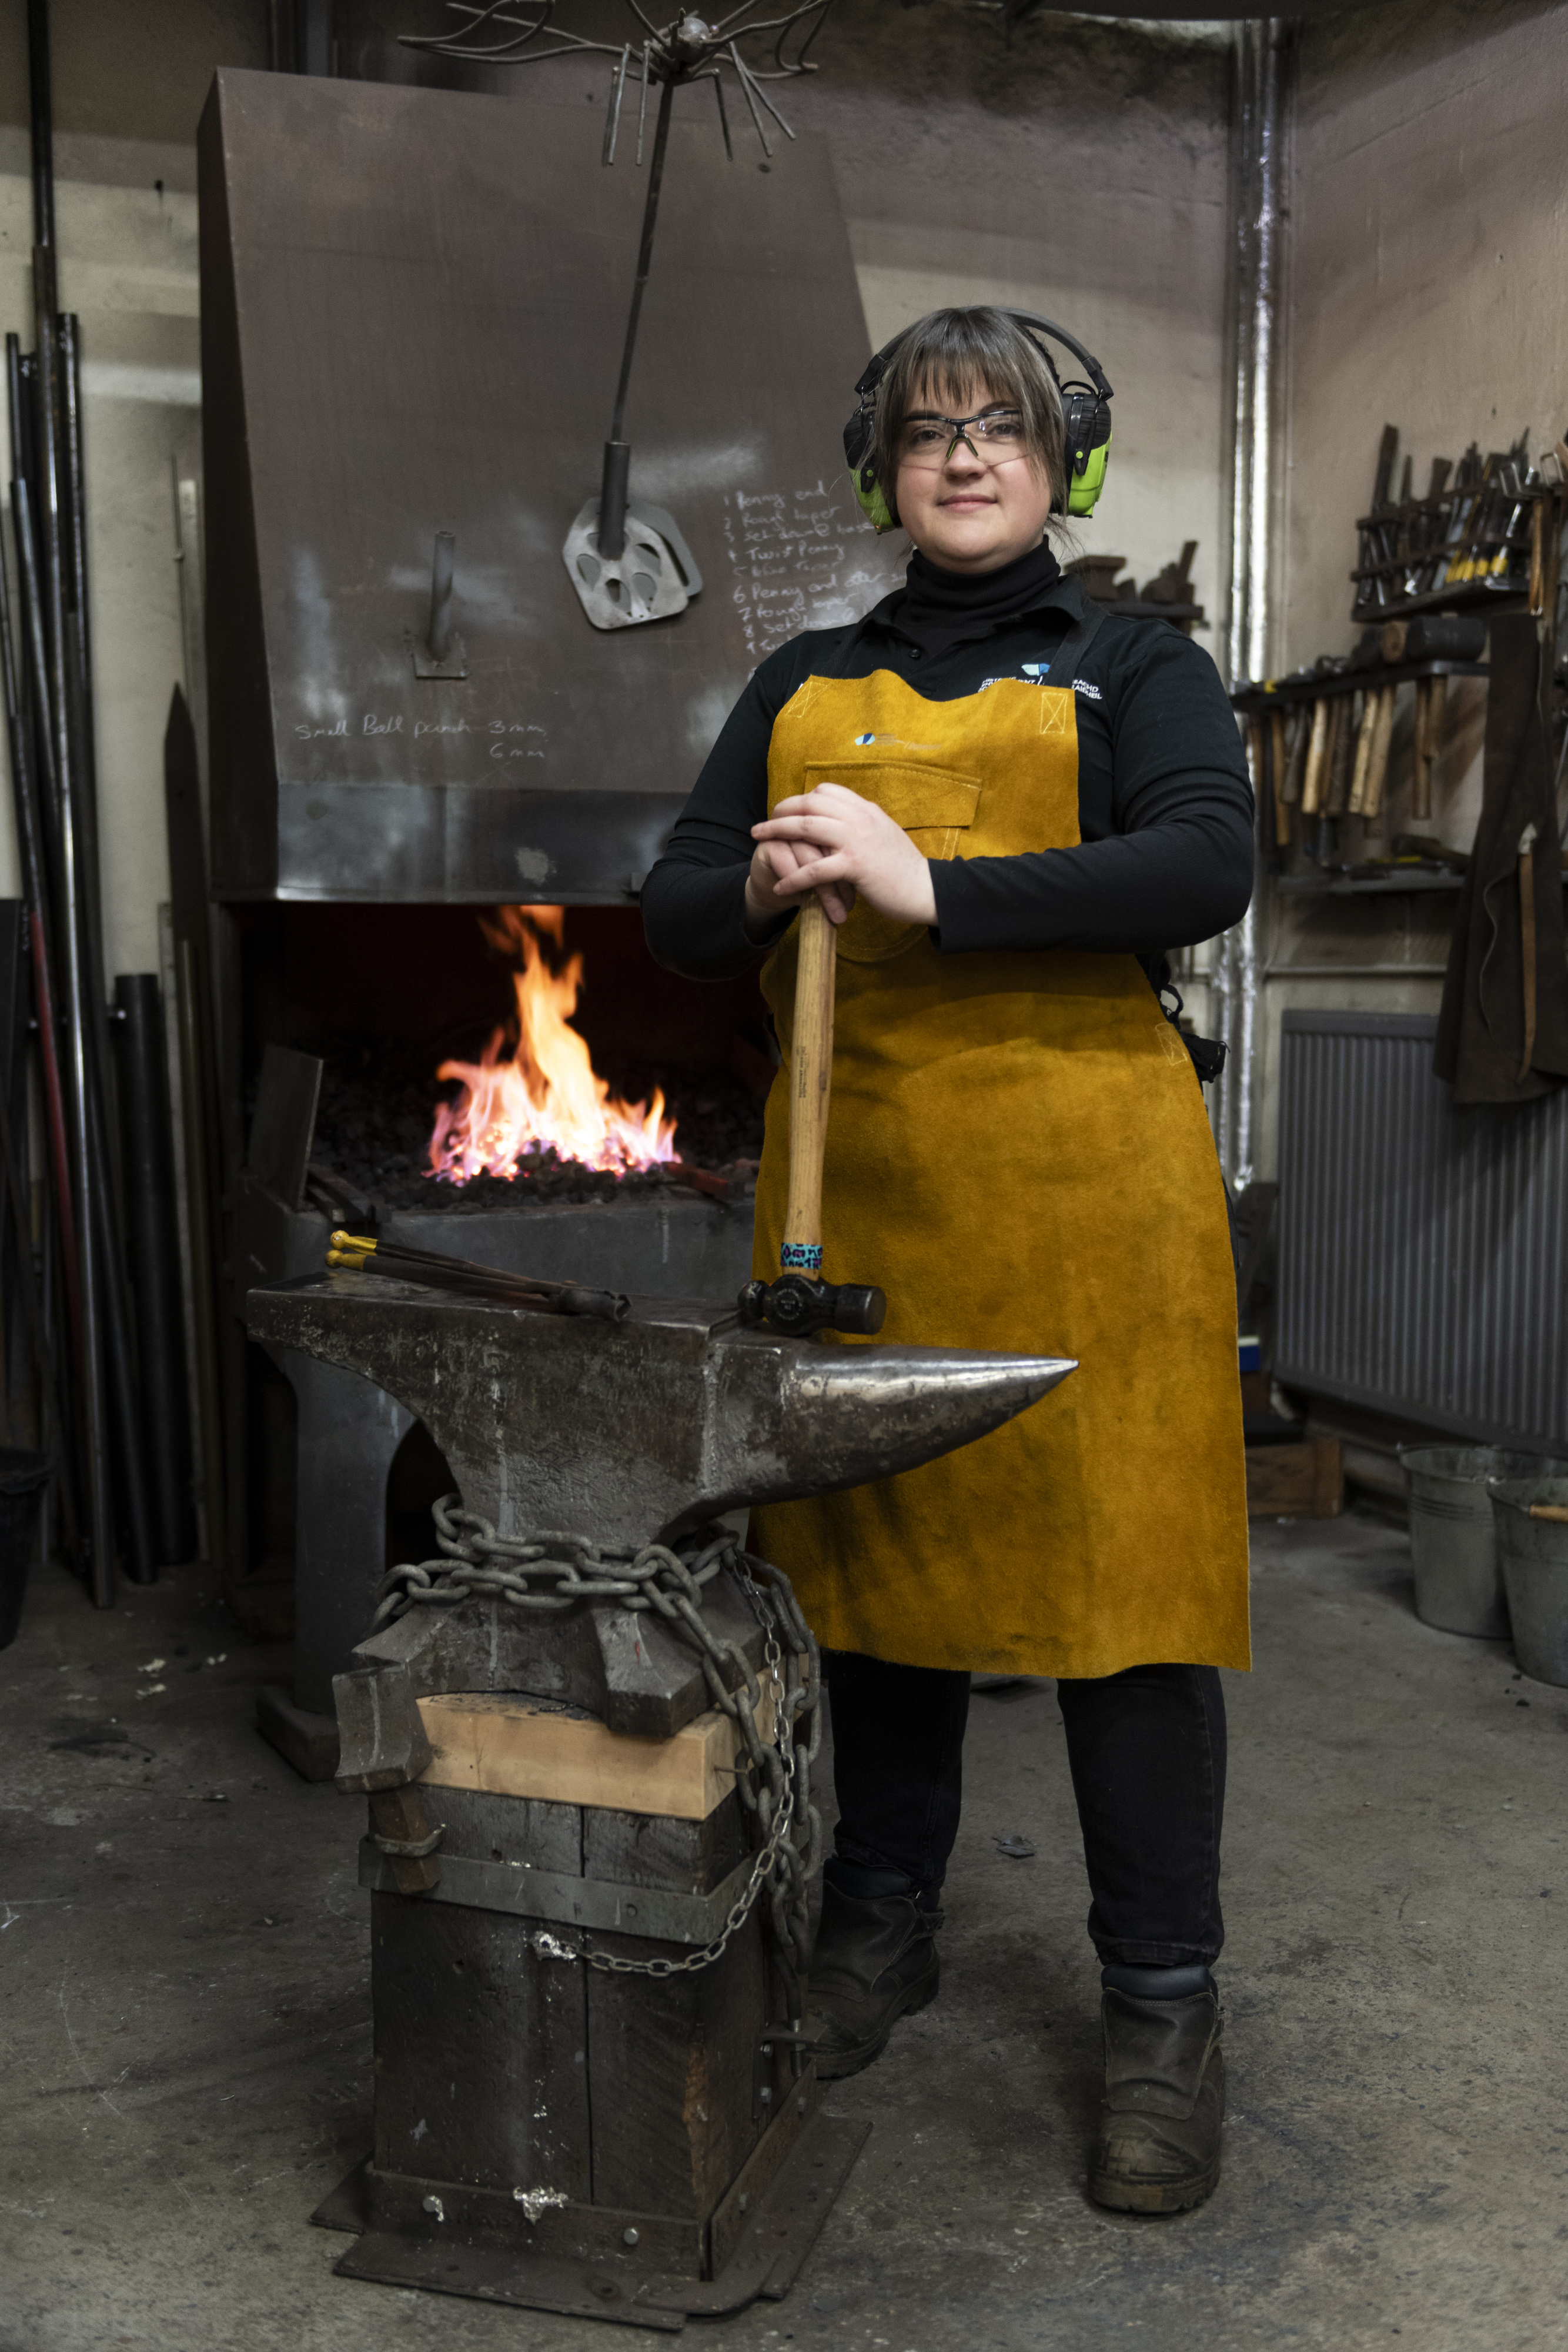 Preserving Scotland’s heritage: Stonemason Luke and blacksmith Stacey uphold centuries-old traditions